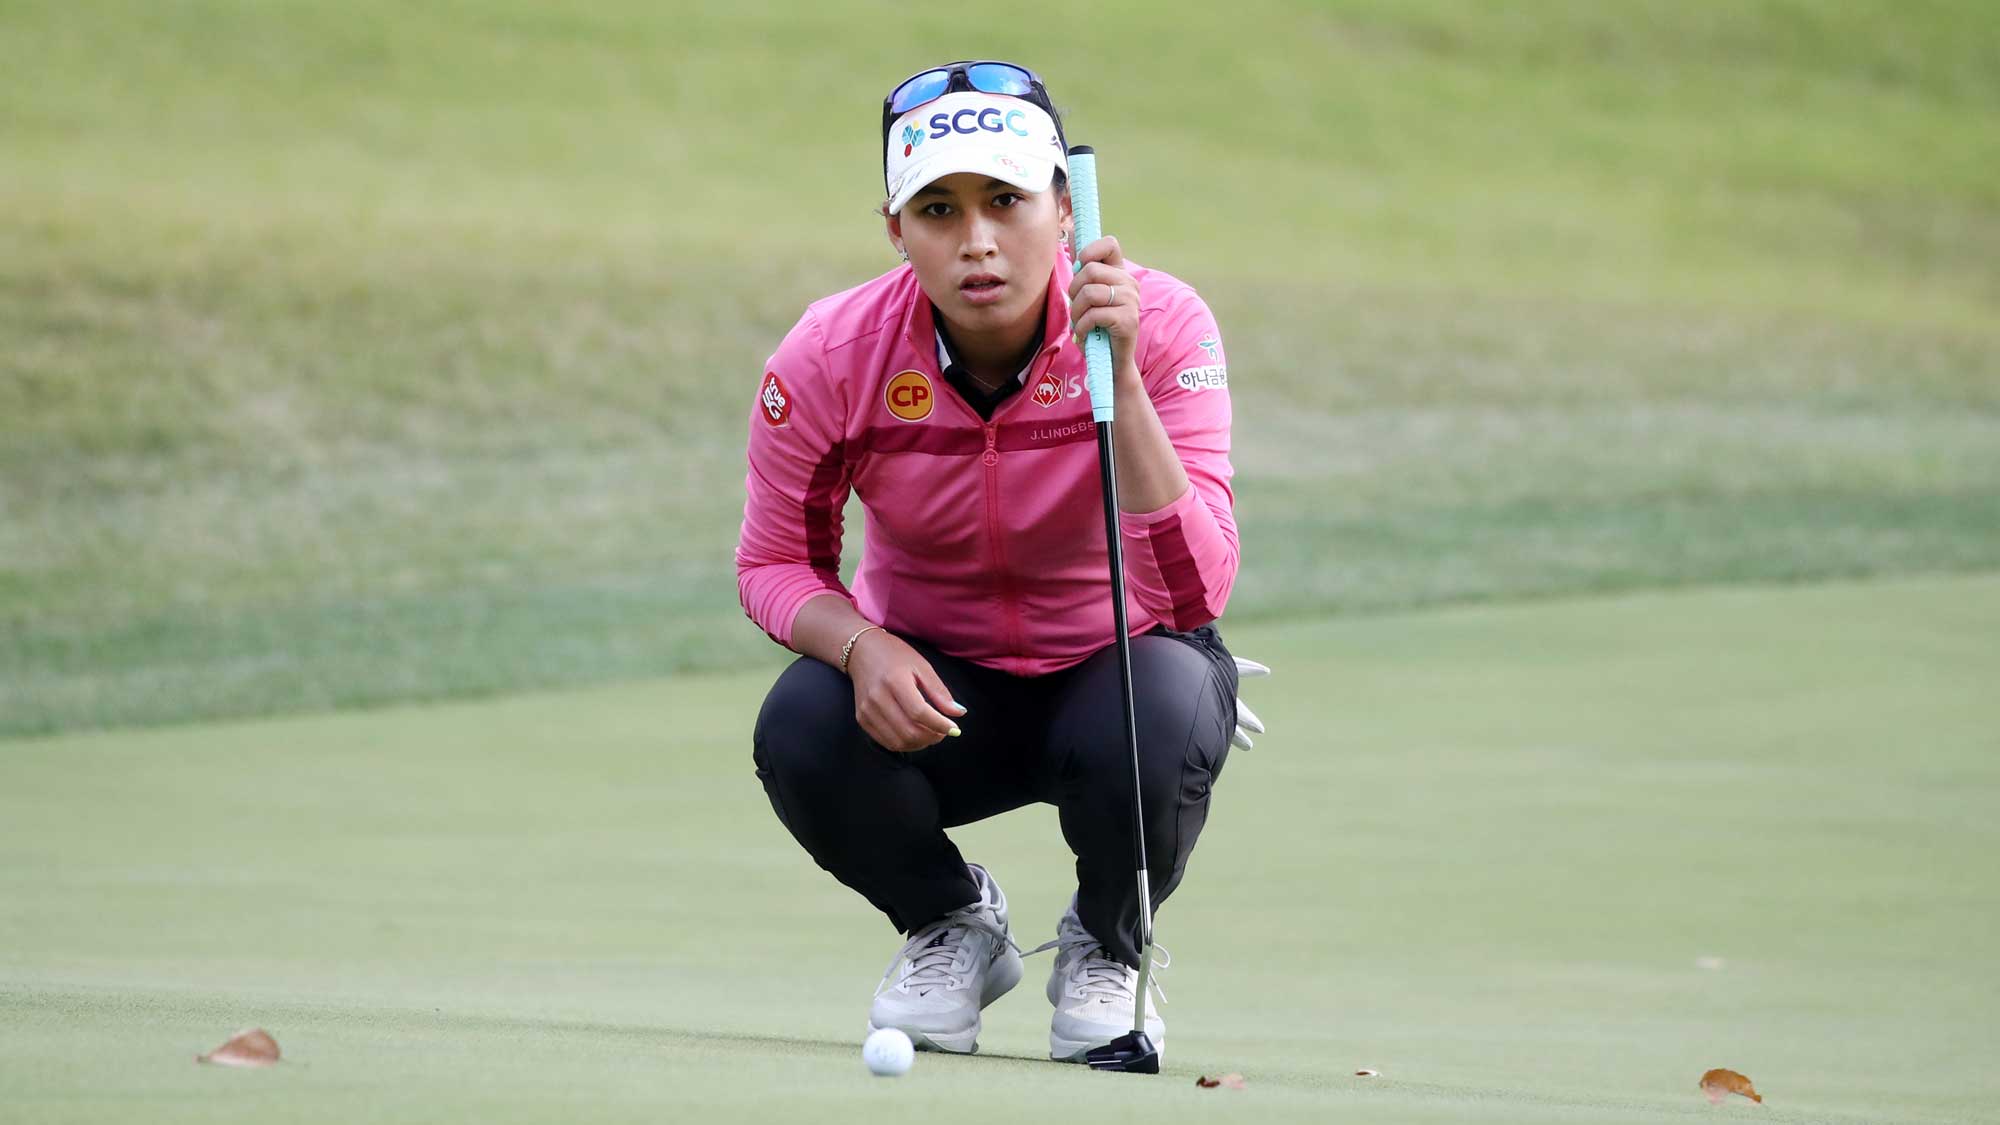 Atthaya Thitikul of Thailand lines up a putt on the 5th green during the final round of the BMW Ladies Championship